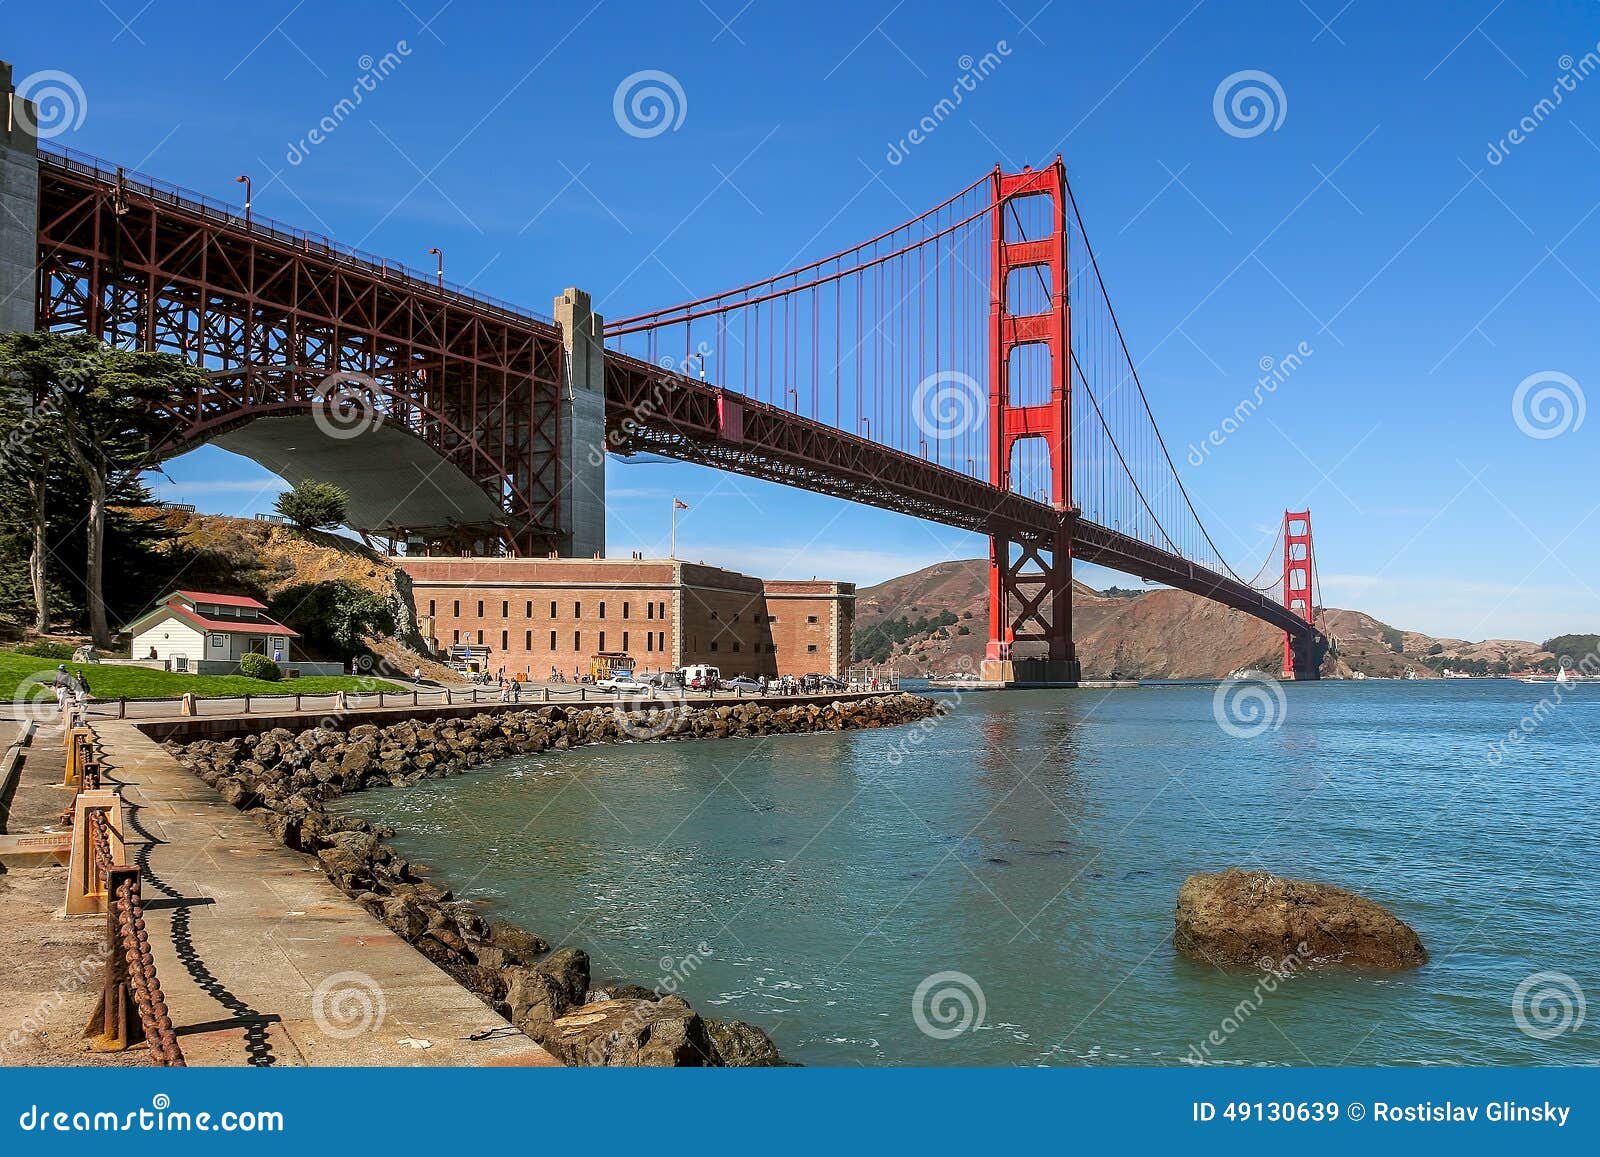 golden gate bridge and fort point.